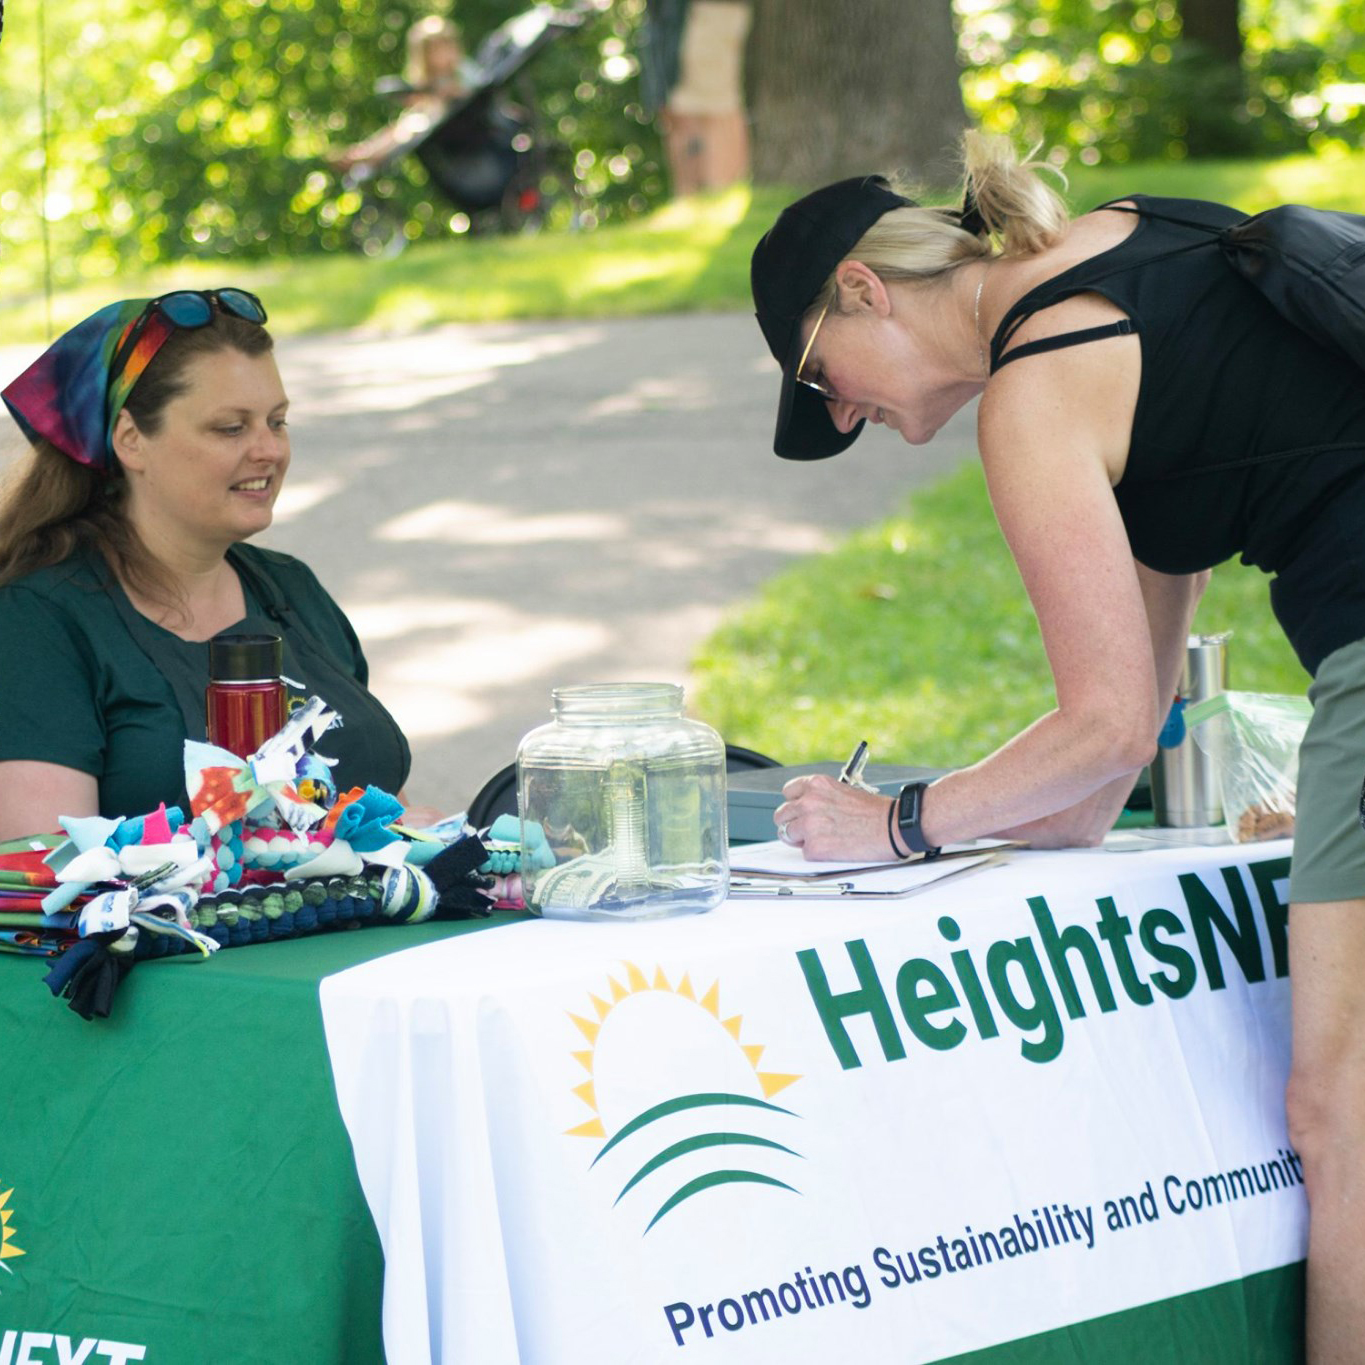 Signing up for a sustaining membership helps HeightsNEXT fund sustainable activities in Columbia Heights, MN.